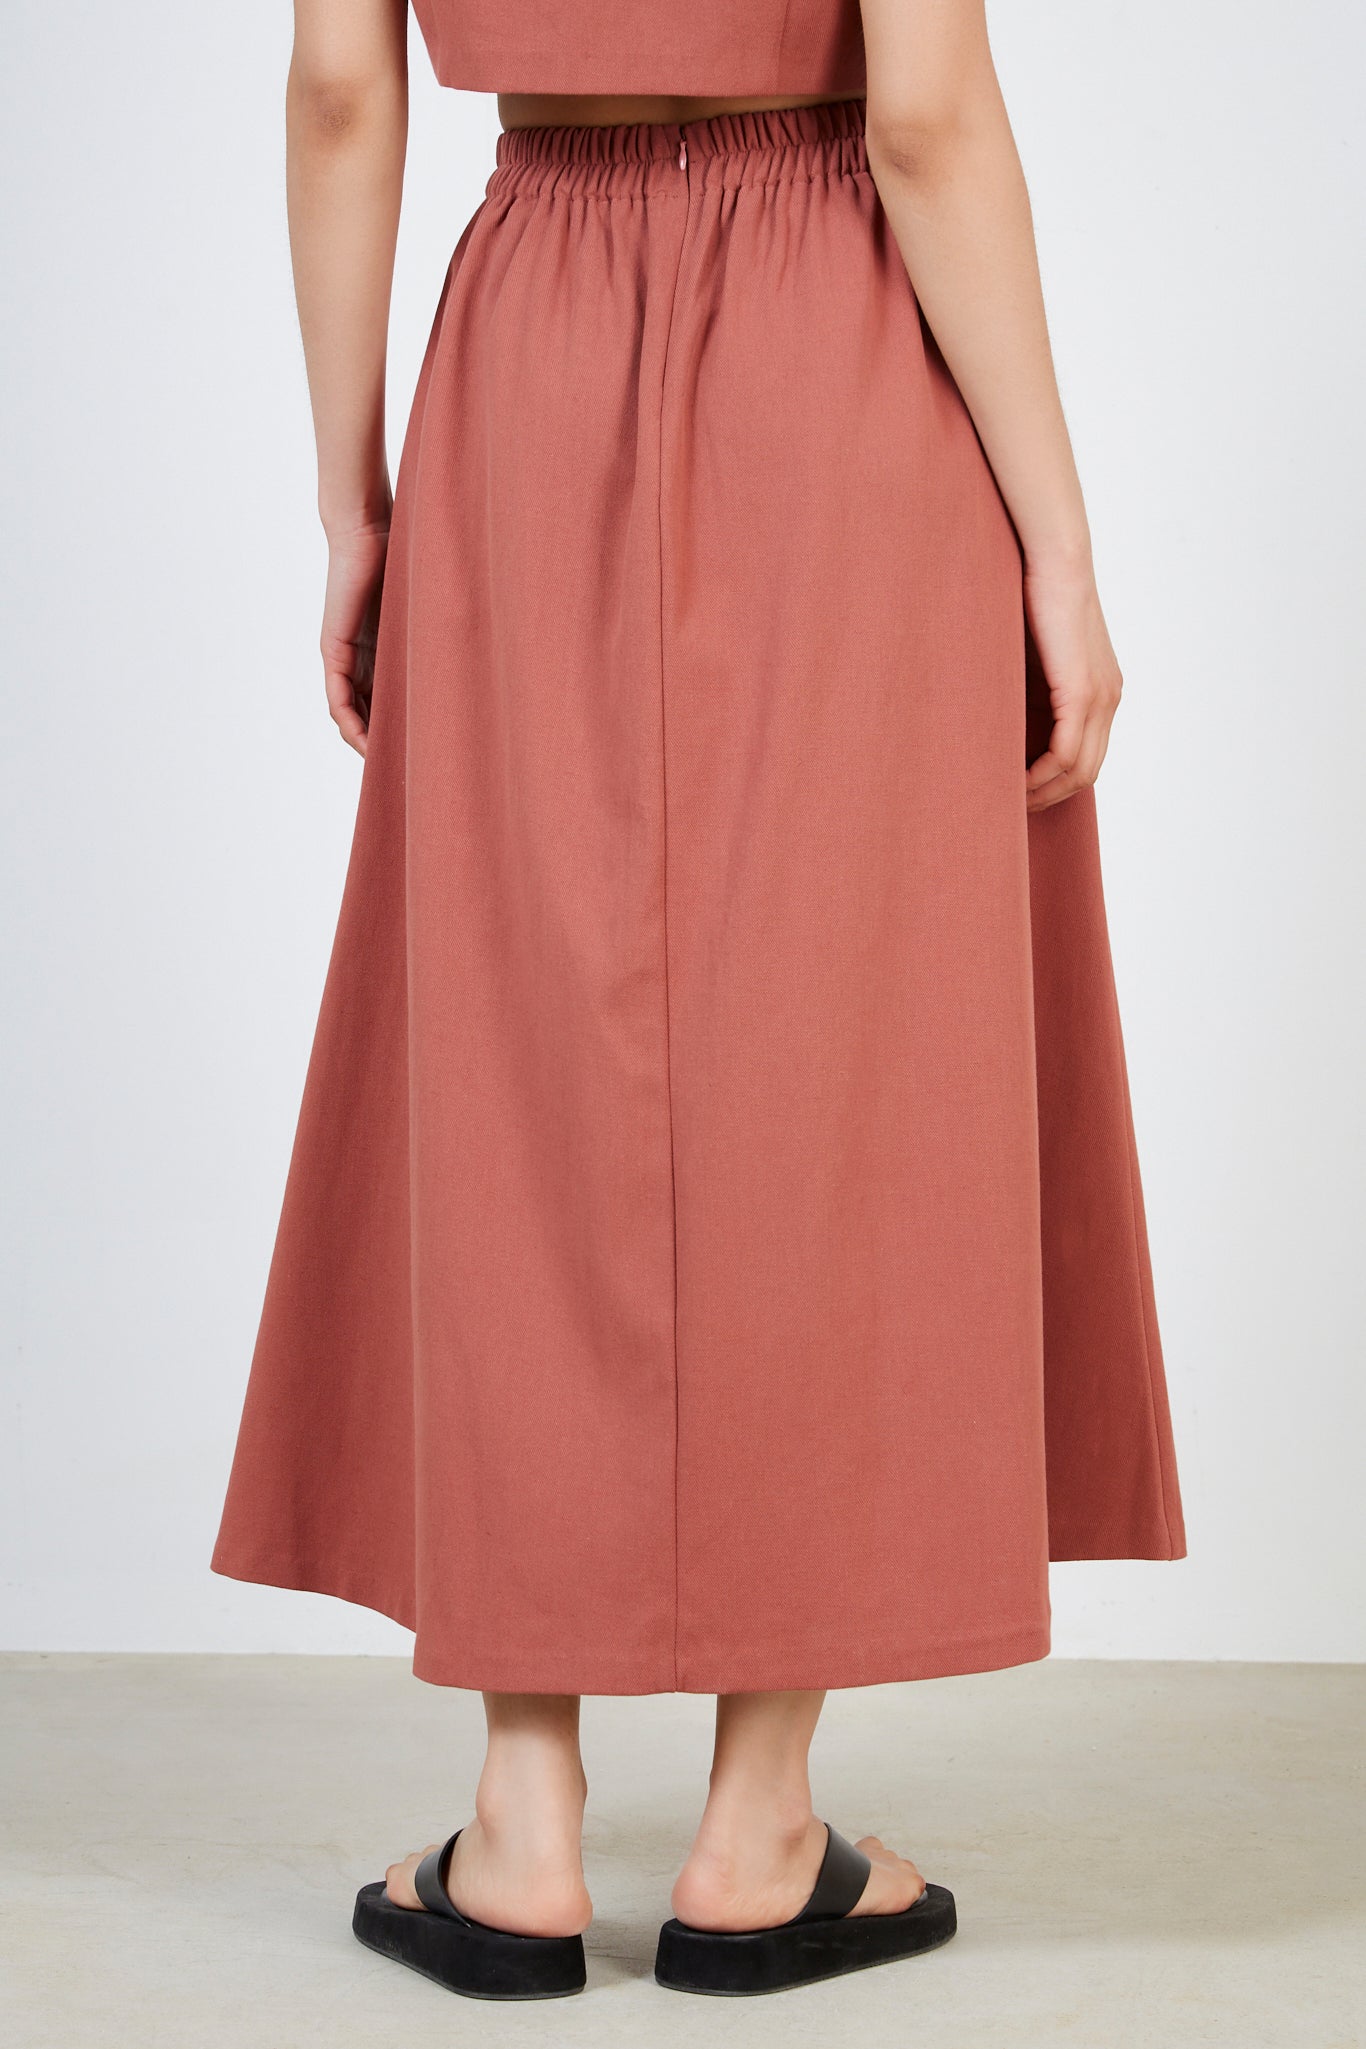 Rust red pleated skirt_2